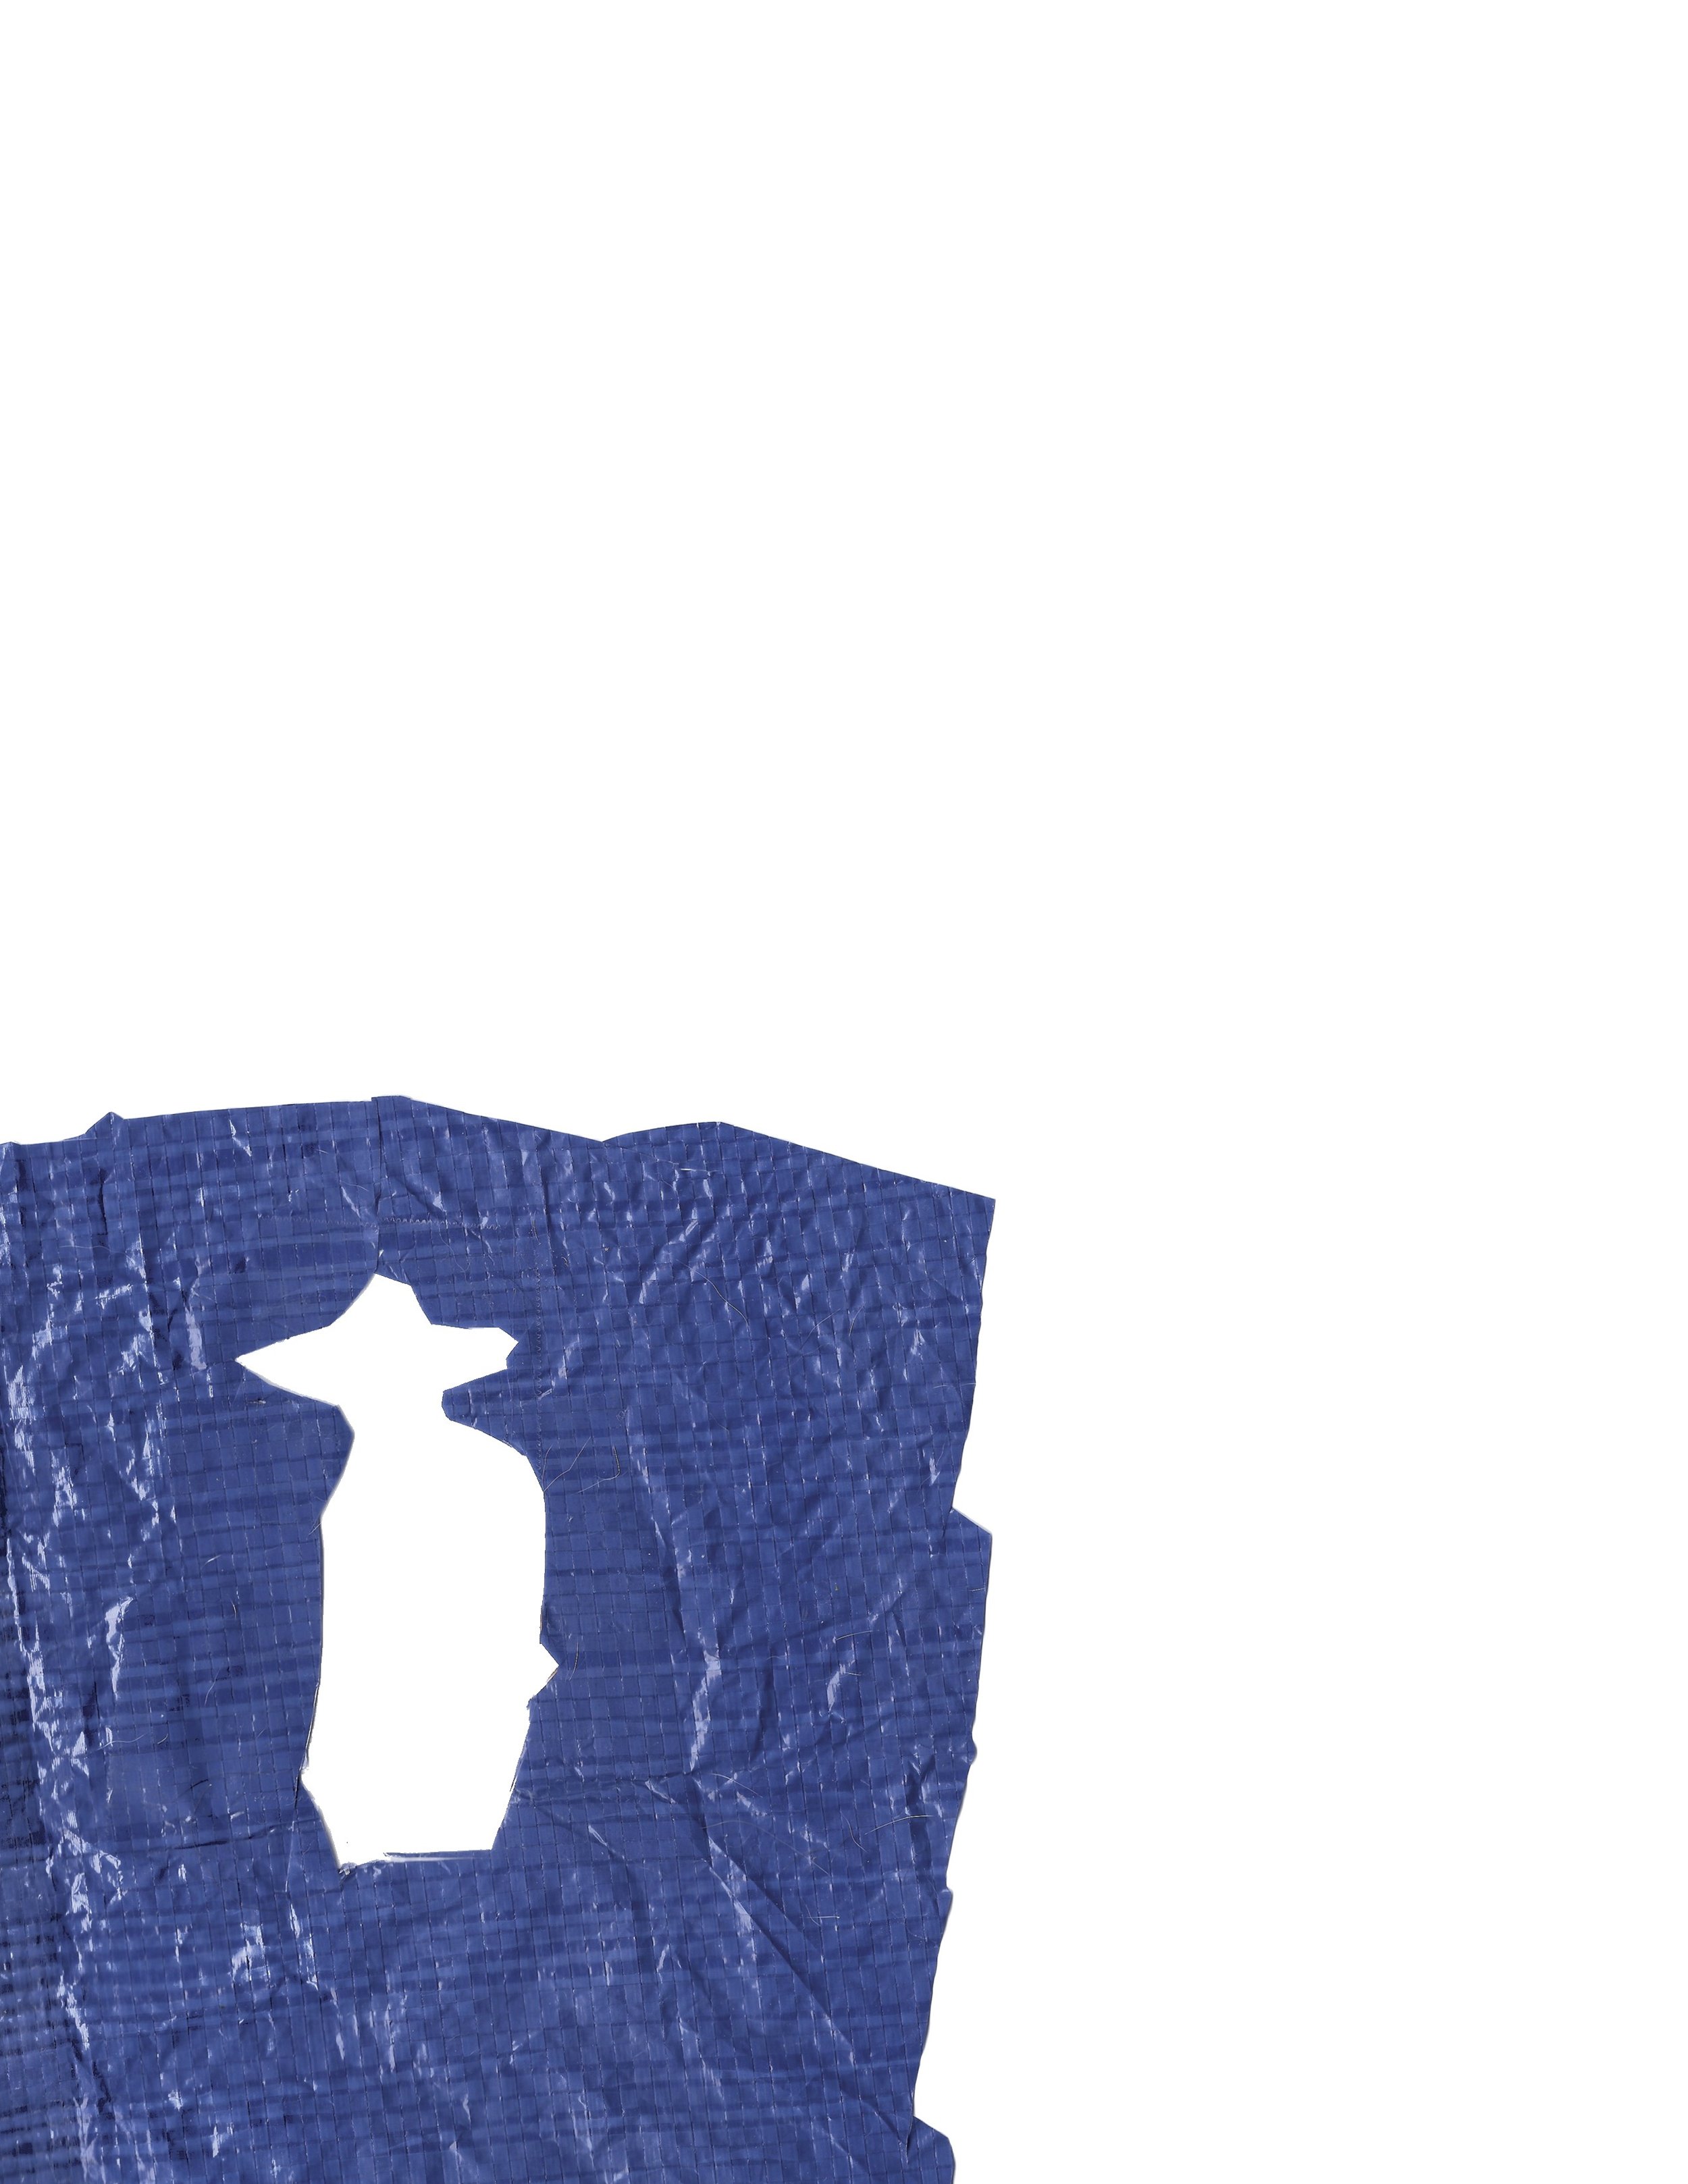  [scan of the sheet of blue tarp the original silhouette with a sombrero was cut from] 